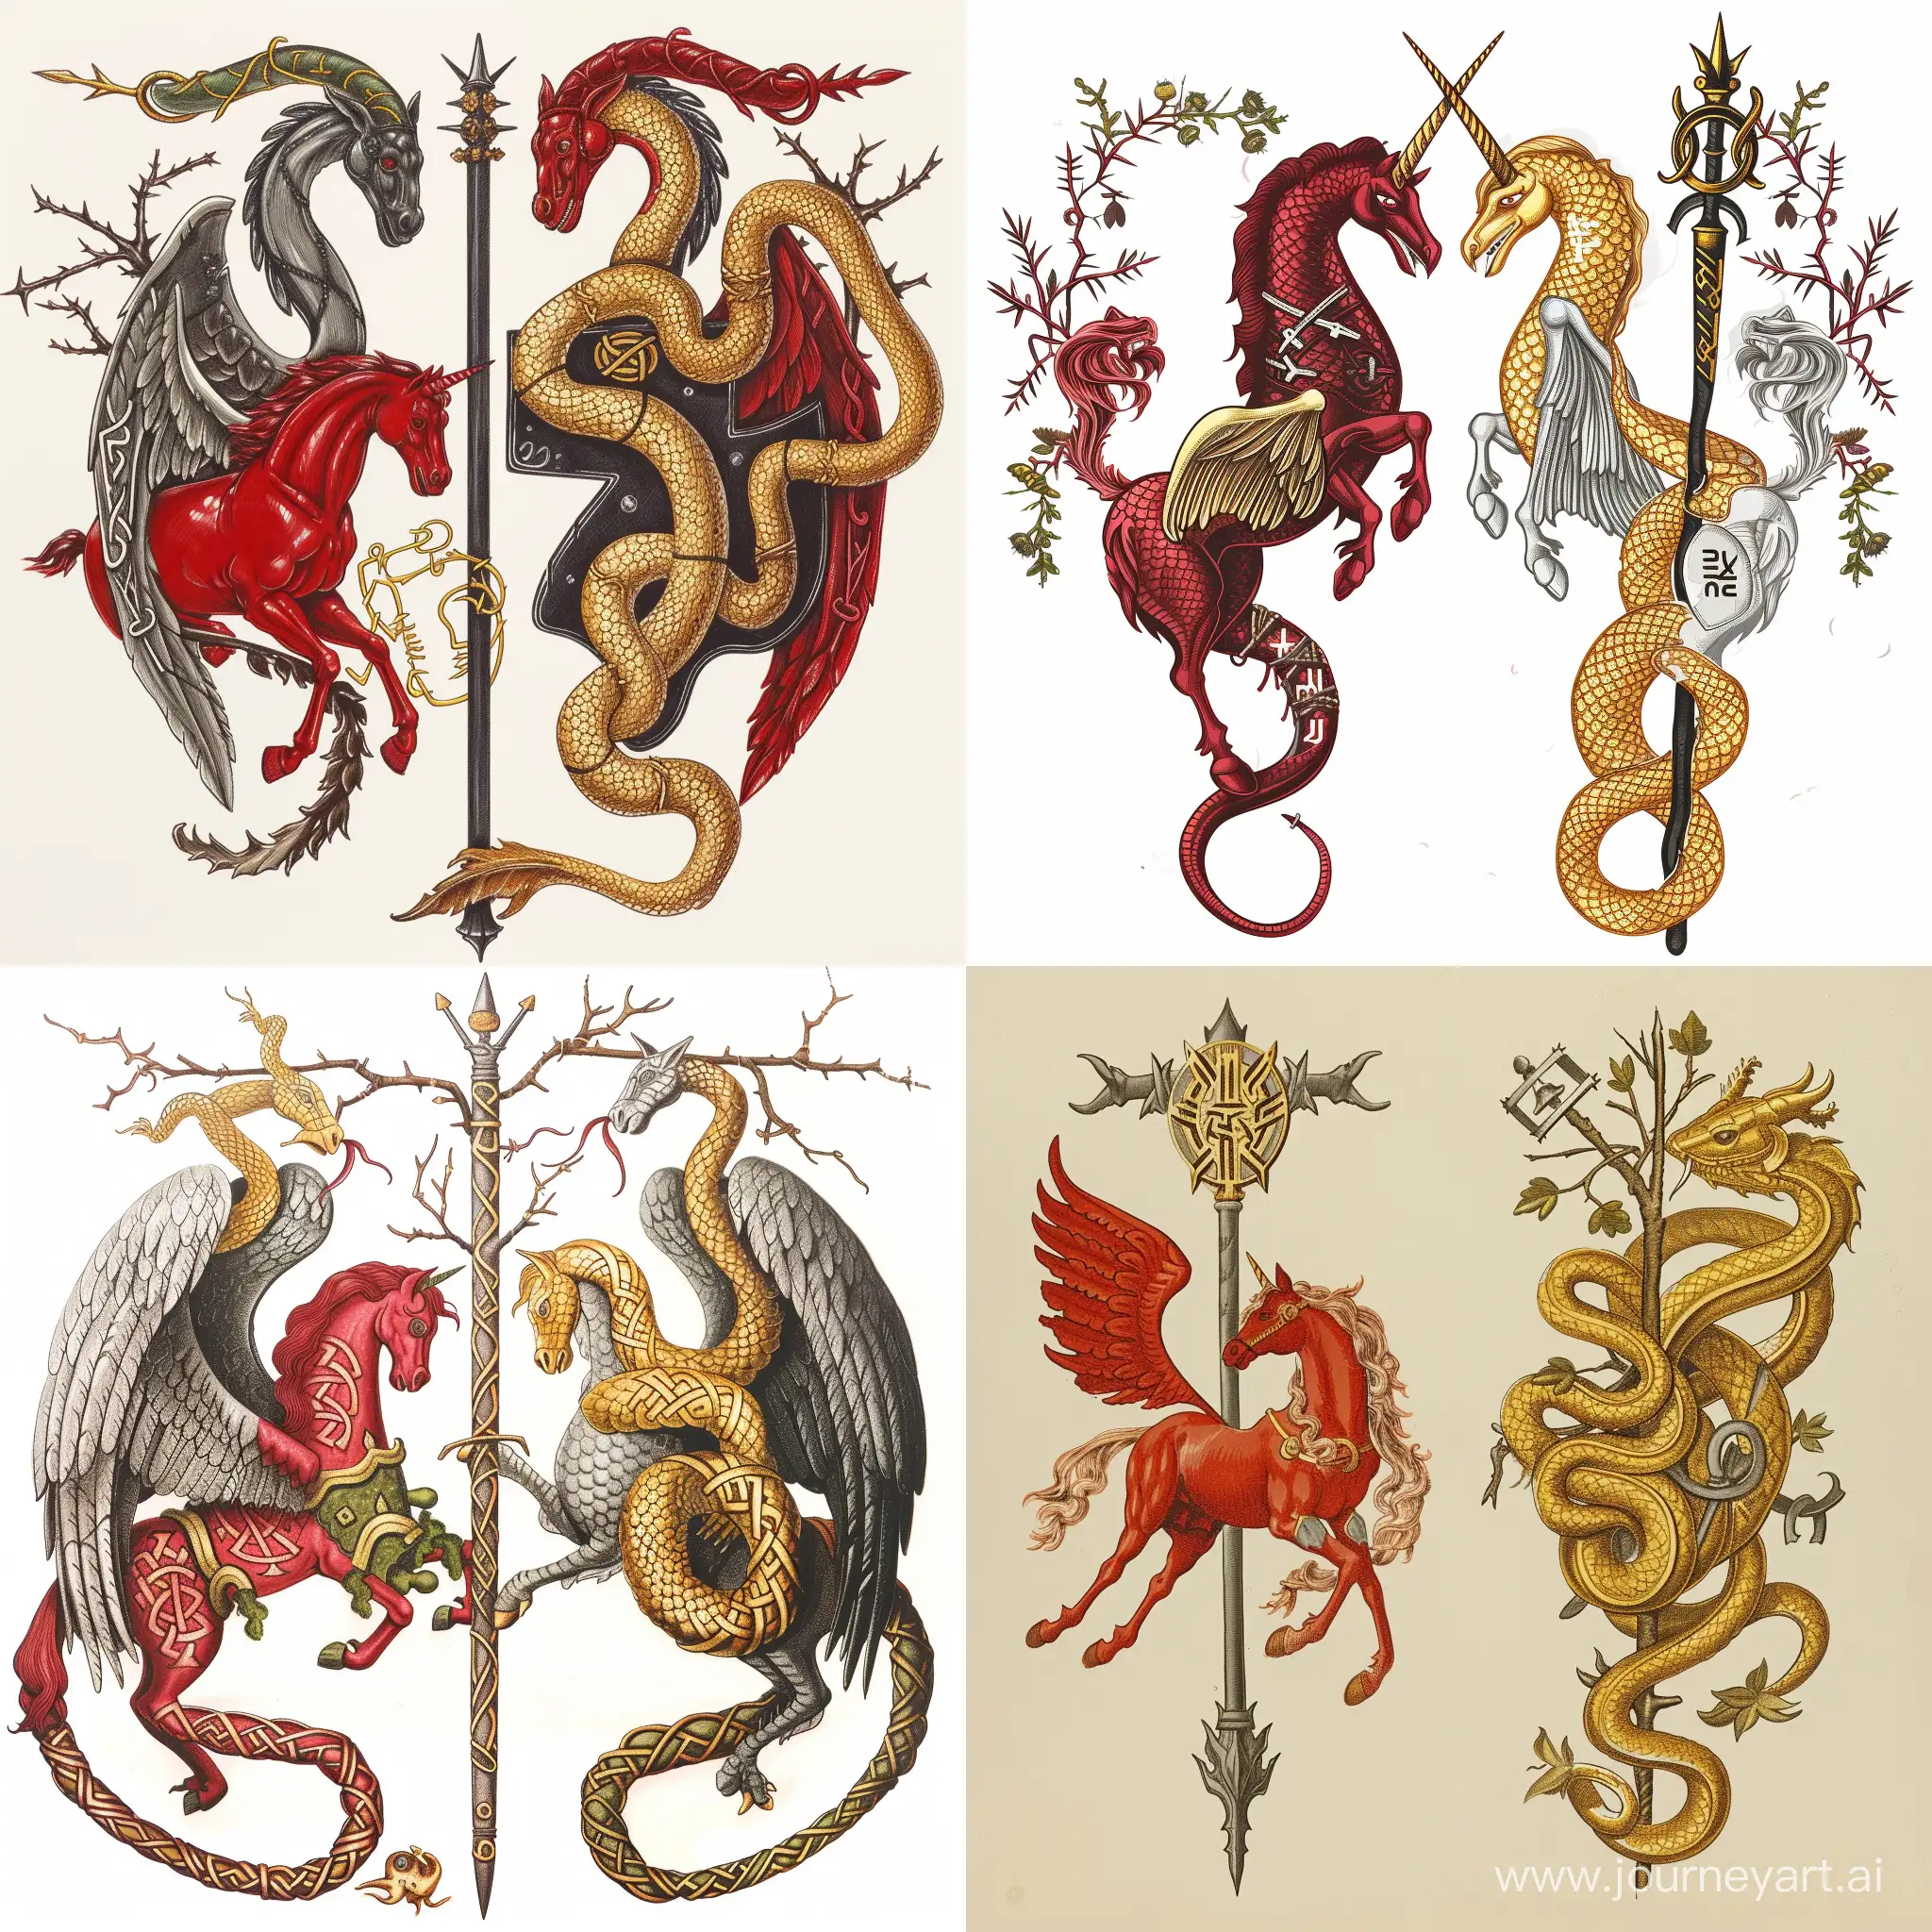 family coat of arms, Celtic heraldry, runes, on the right a golden snake entwining a staff, on the left a red pegasus on end, thorn branches at the top